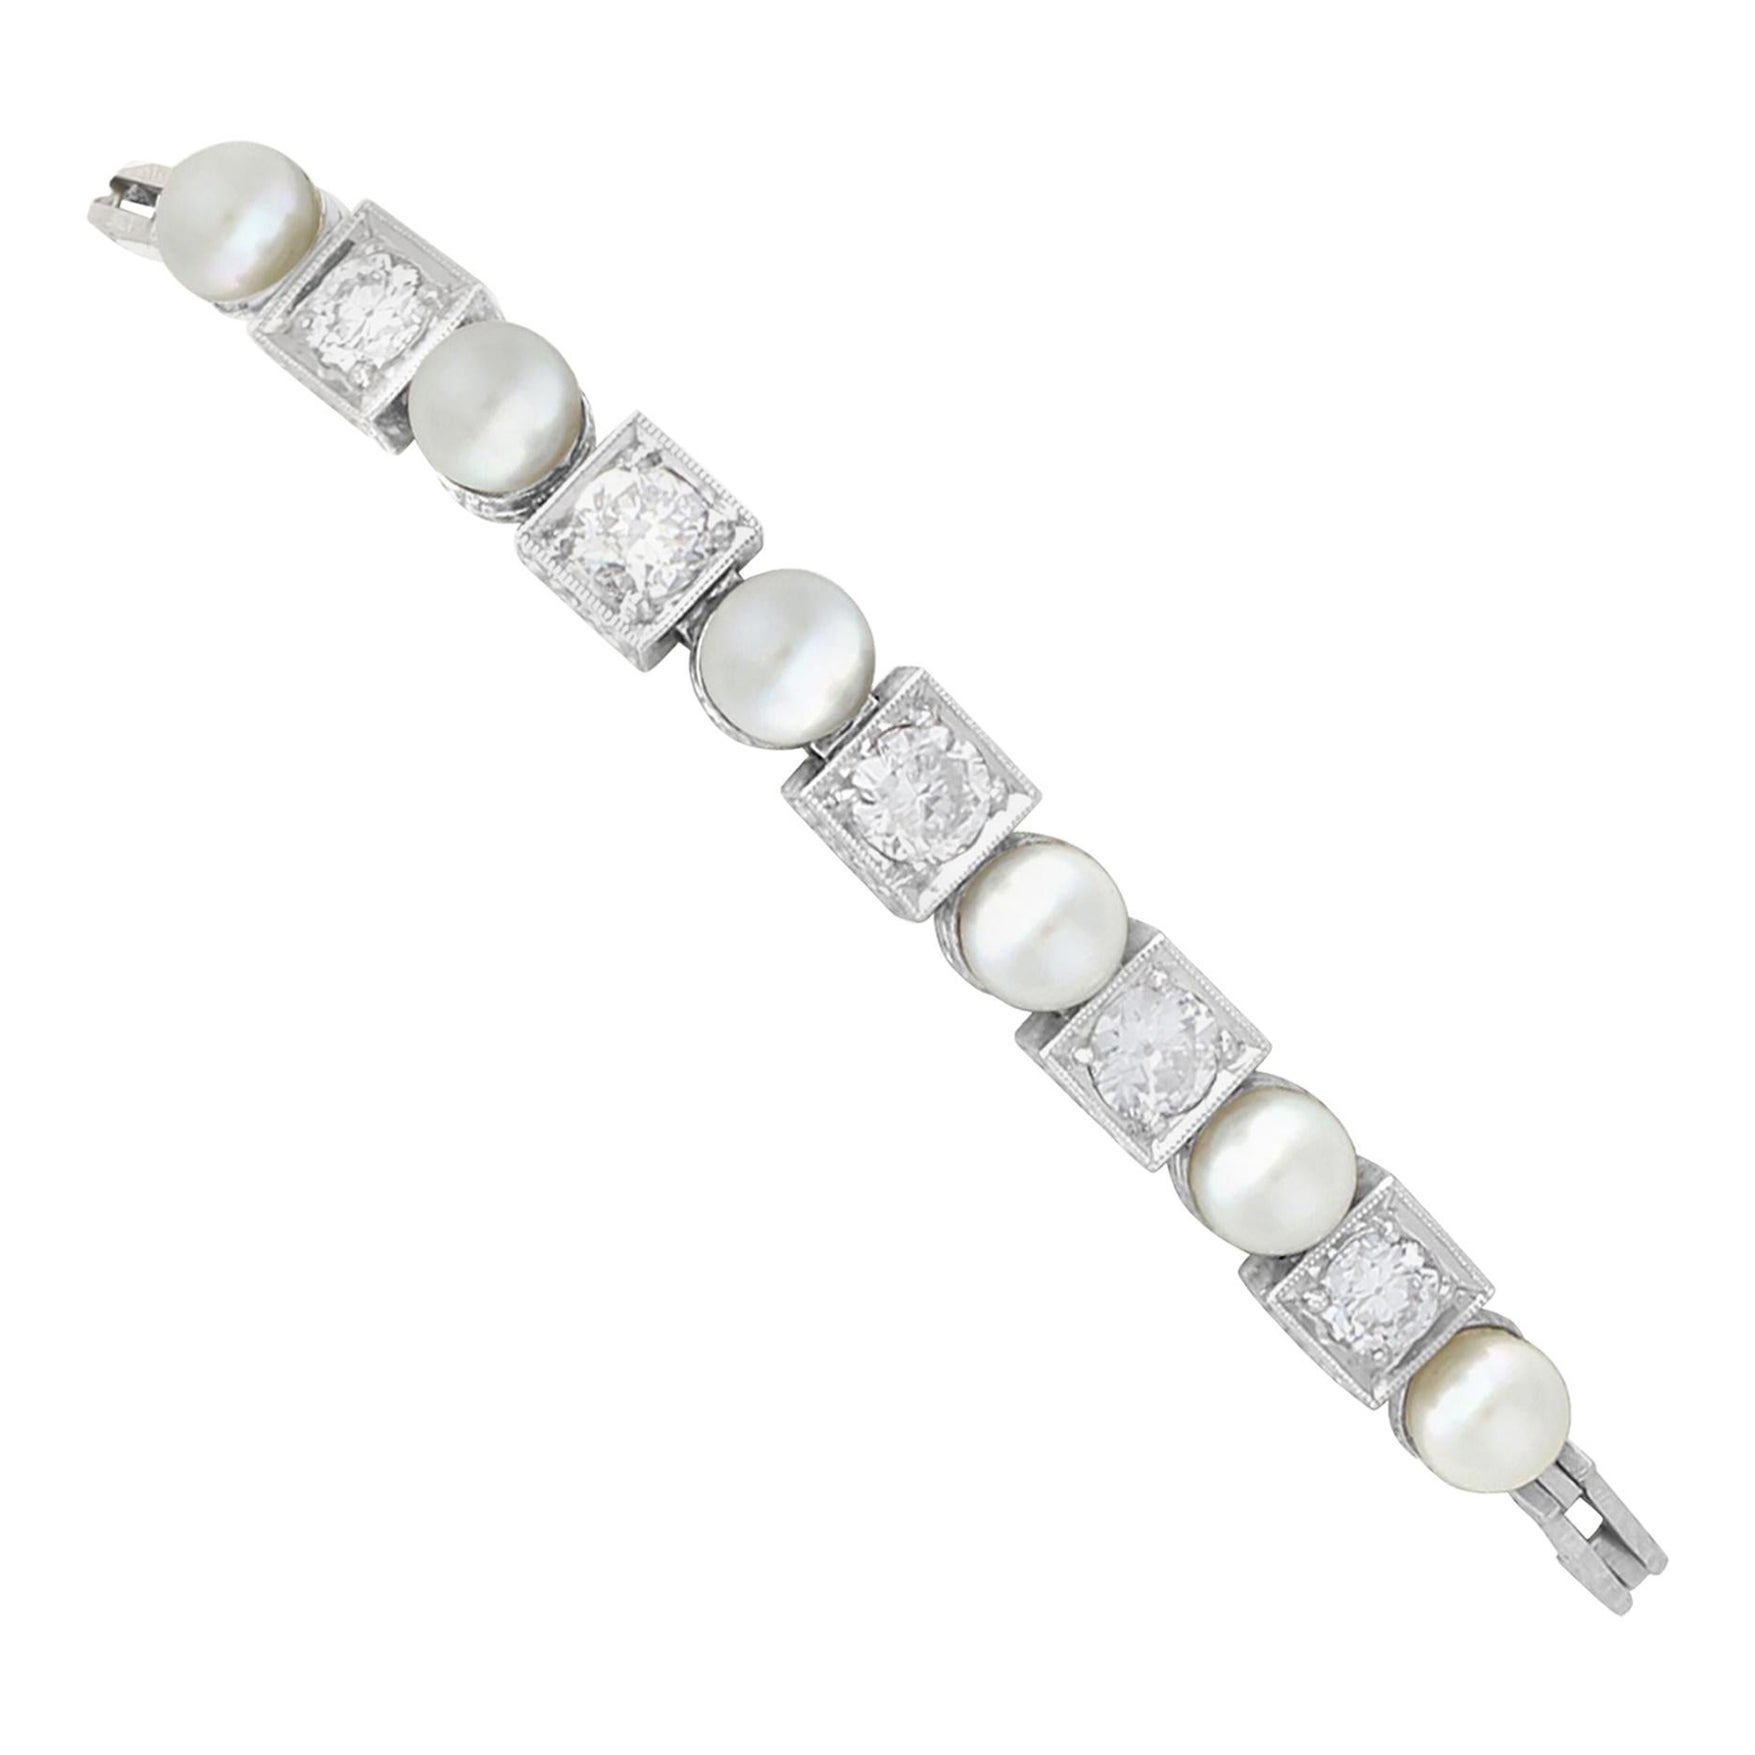 1930s Antique 1.38 Carat Diamond and Cultured Pearl White Gold Bracelet For Sale